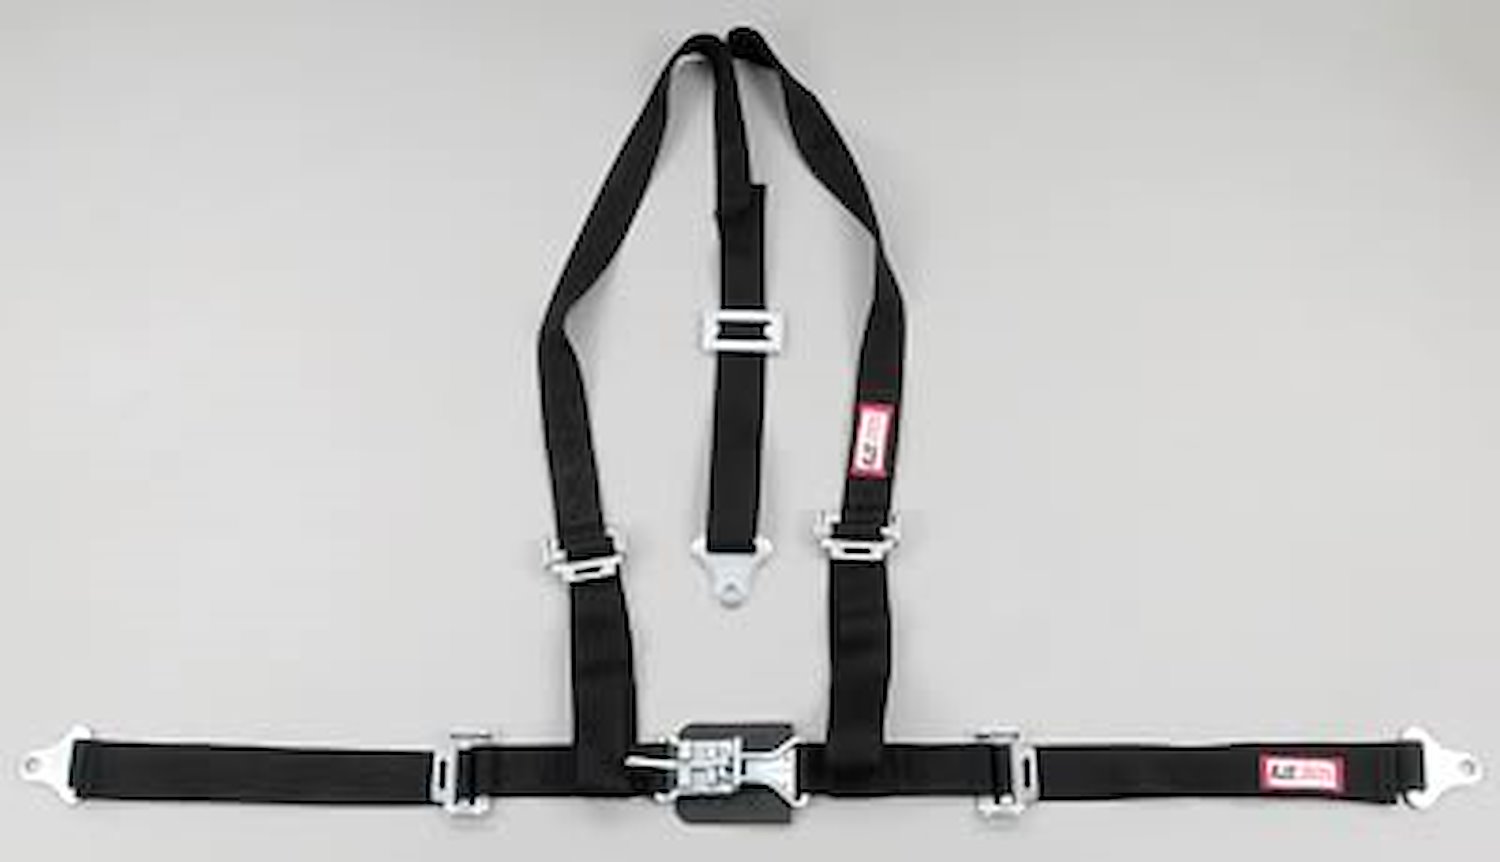 NON-SFI L&L HARNESS 3 PULL DOWN Lap Belt w/adjuster 2 S.H. Y FLOOR Mount ALL WRAP ENDS HOT PINK